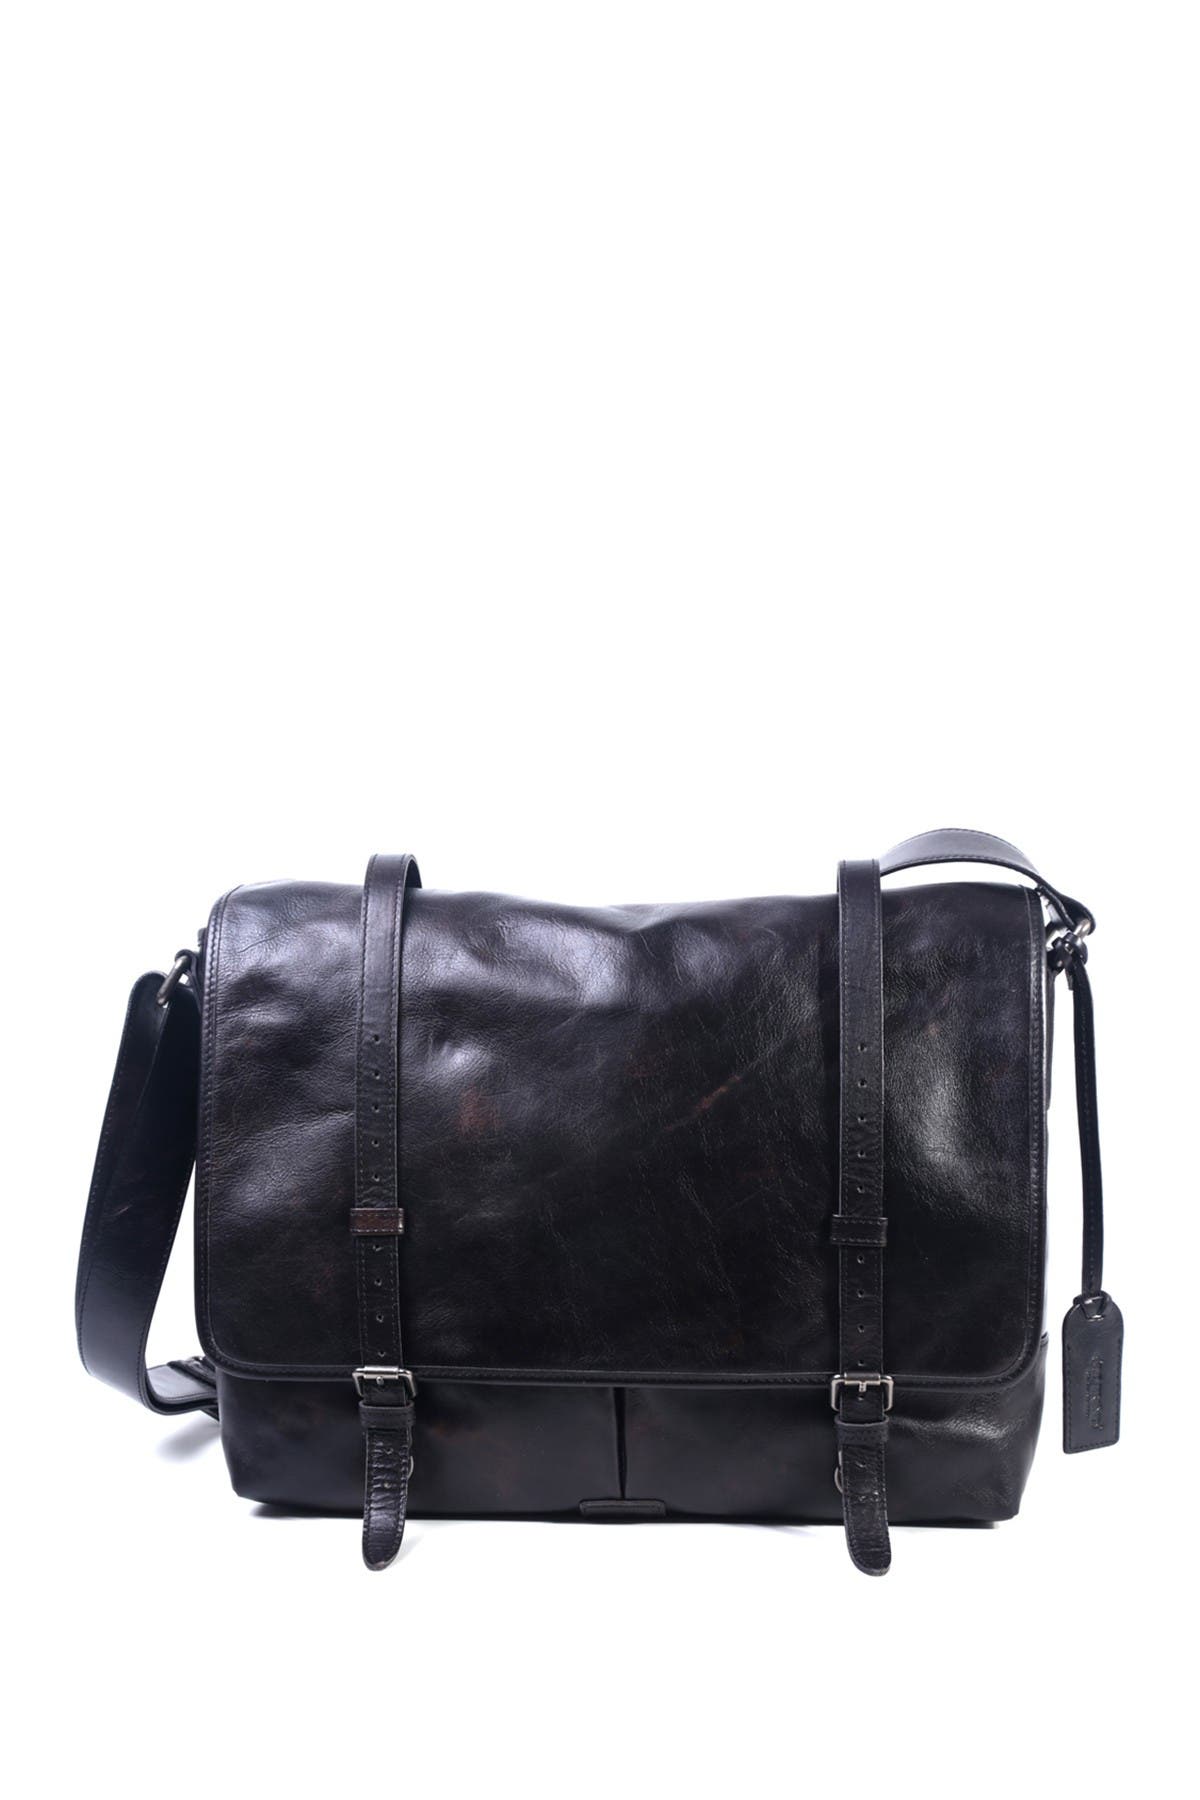 Old Trend Speedwell Leather Messenger Bag In Black